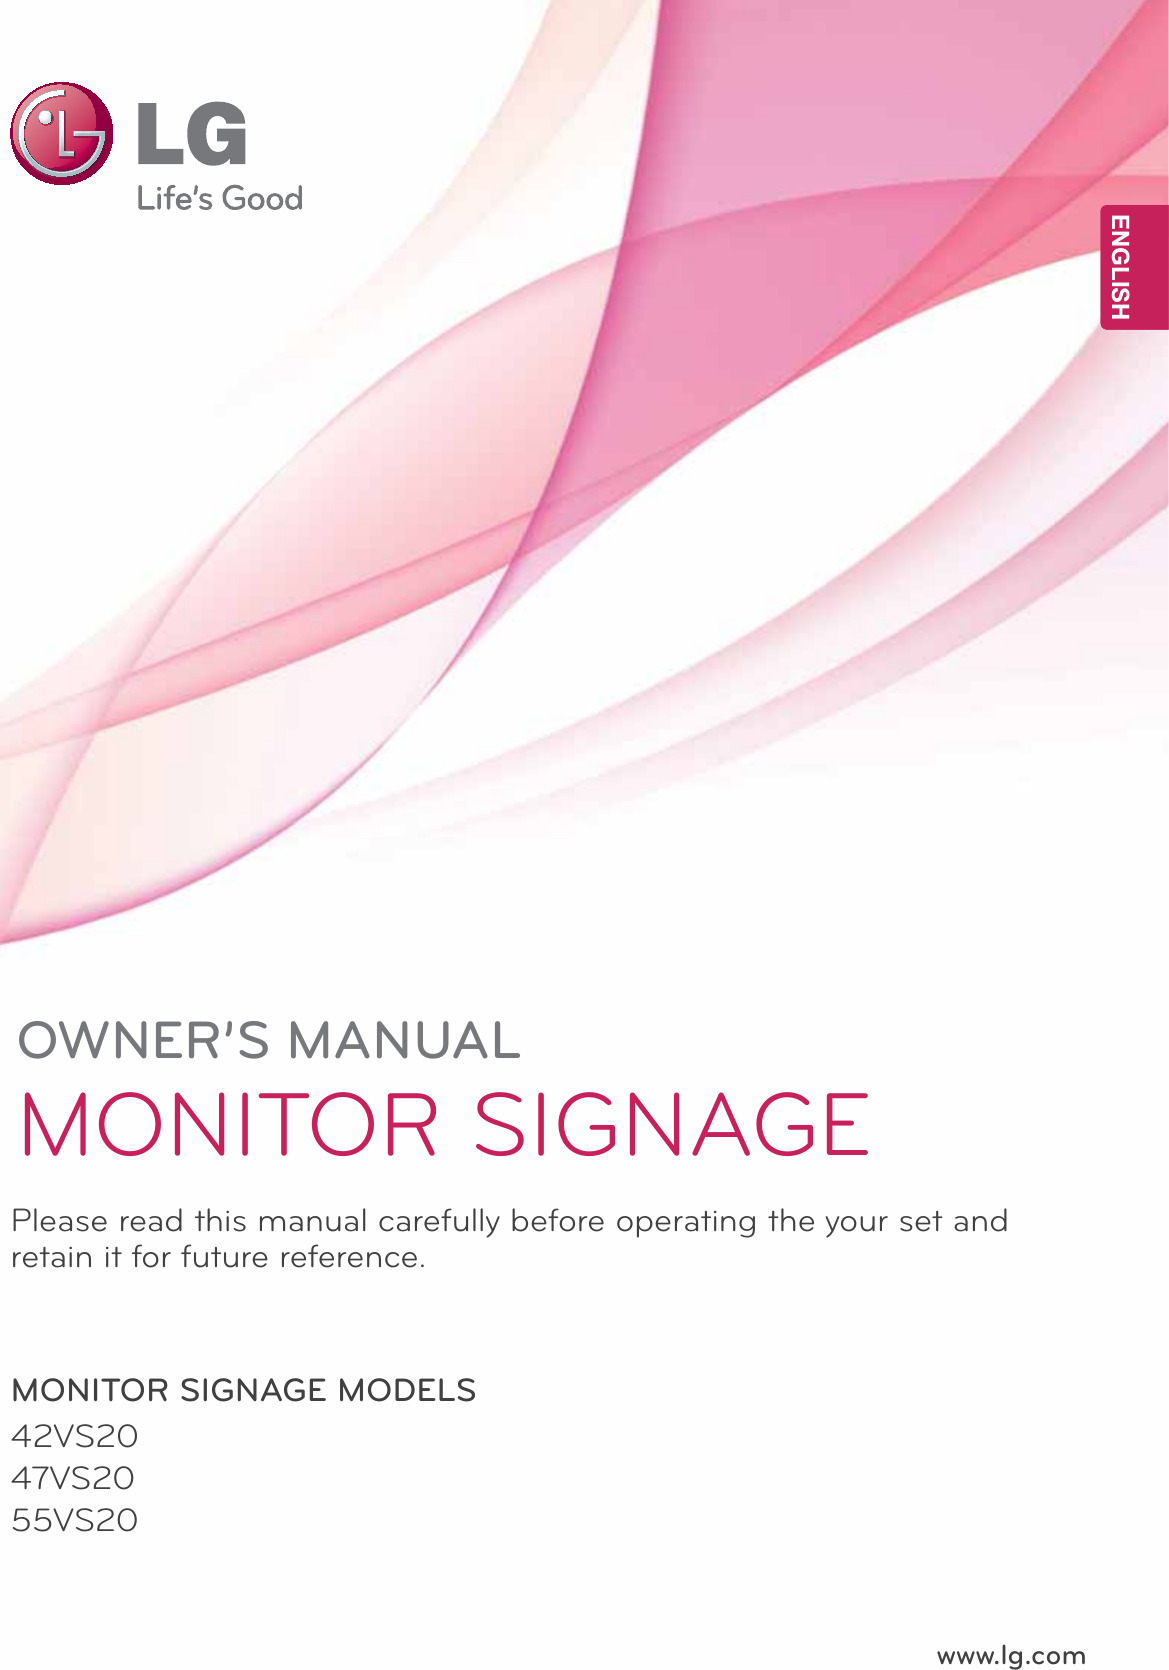 www.lg.comOWNER’S MANUALMONITOR SIGNAGE 42VS2047VS2055VS20Please read this manual carefully before operating the your set and retain it for future reference.MONITOR SIGNAGE MODELSENGENGLISH